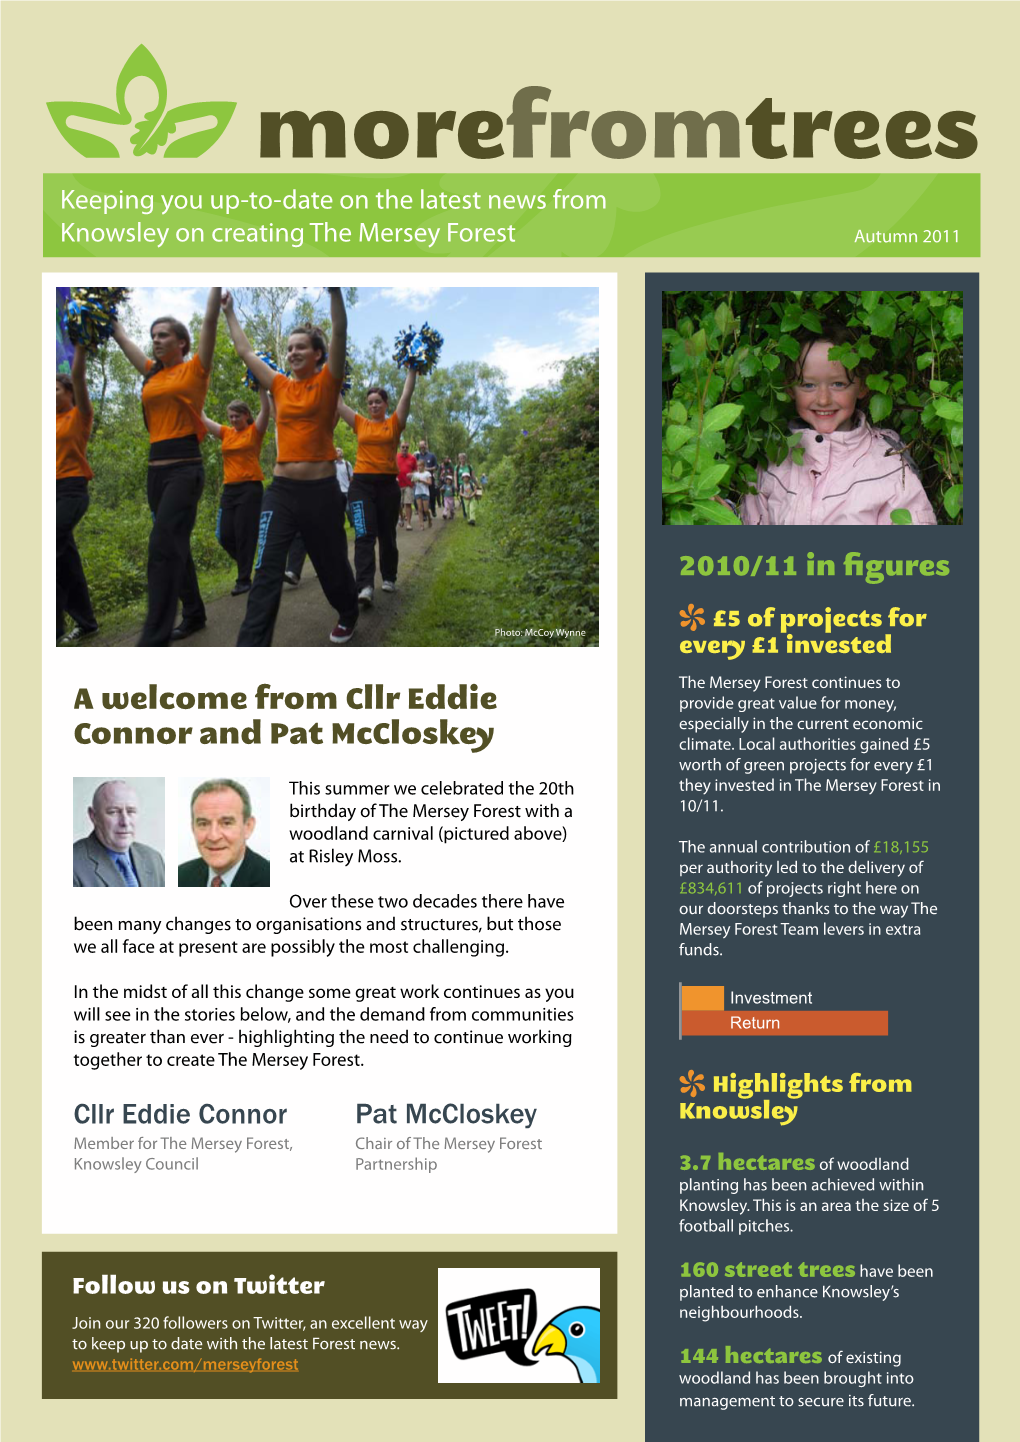 Morefromtrees Keeping You Up-To-Date on the Latest News from Knowsley on Creating the Mersey Forest Autumn 2011